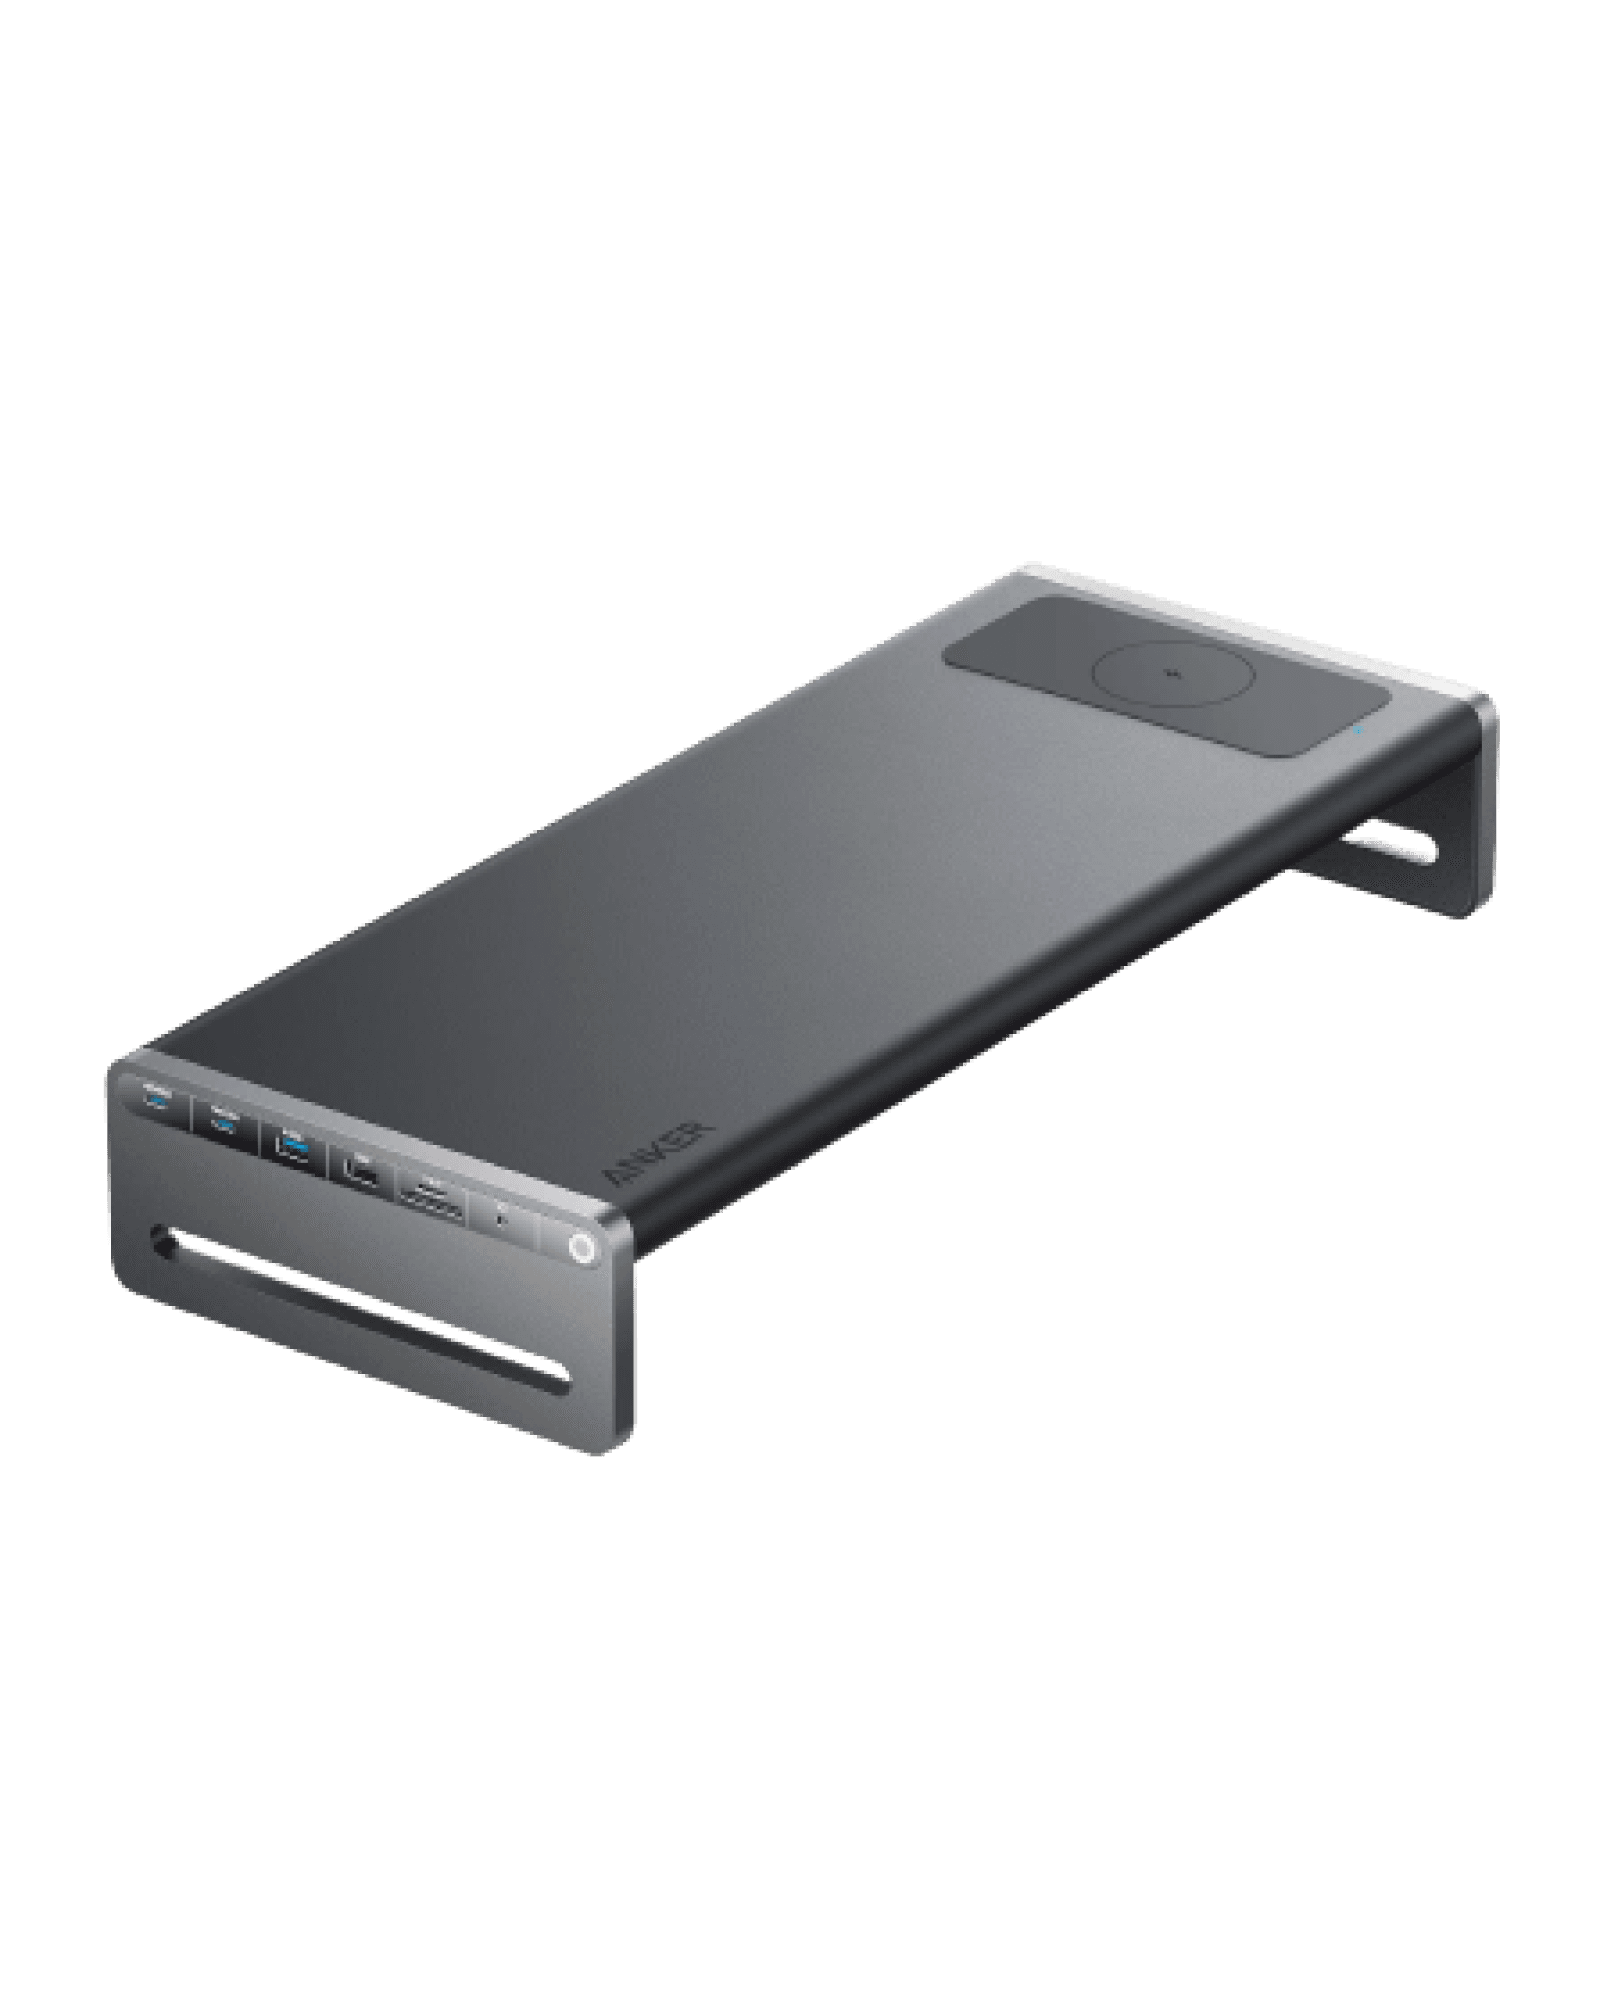 Anker <b>675</b> USB-C Docking Station <br>(12-in-1, Monitor Stand, Wireless)